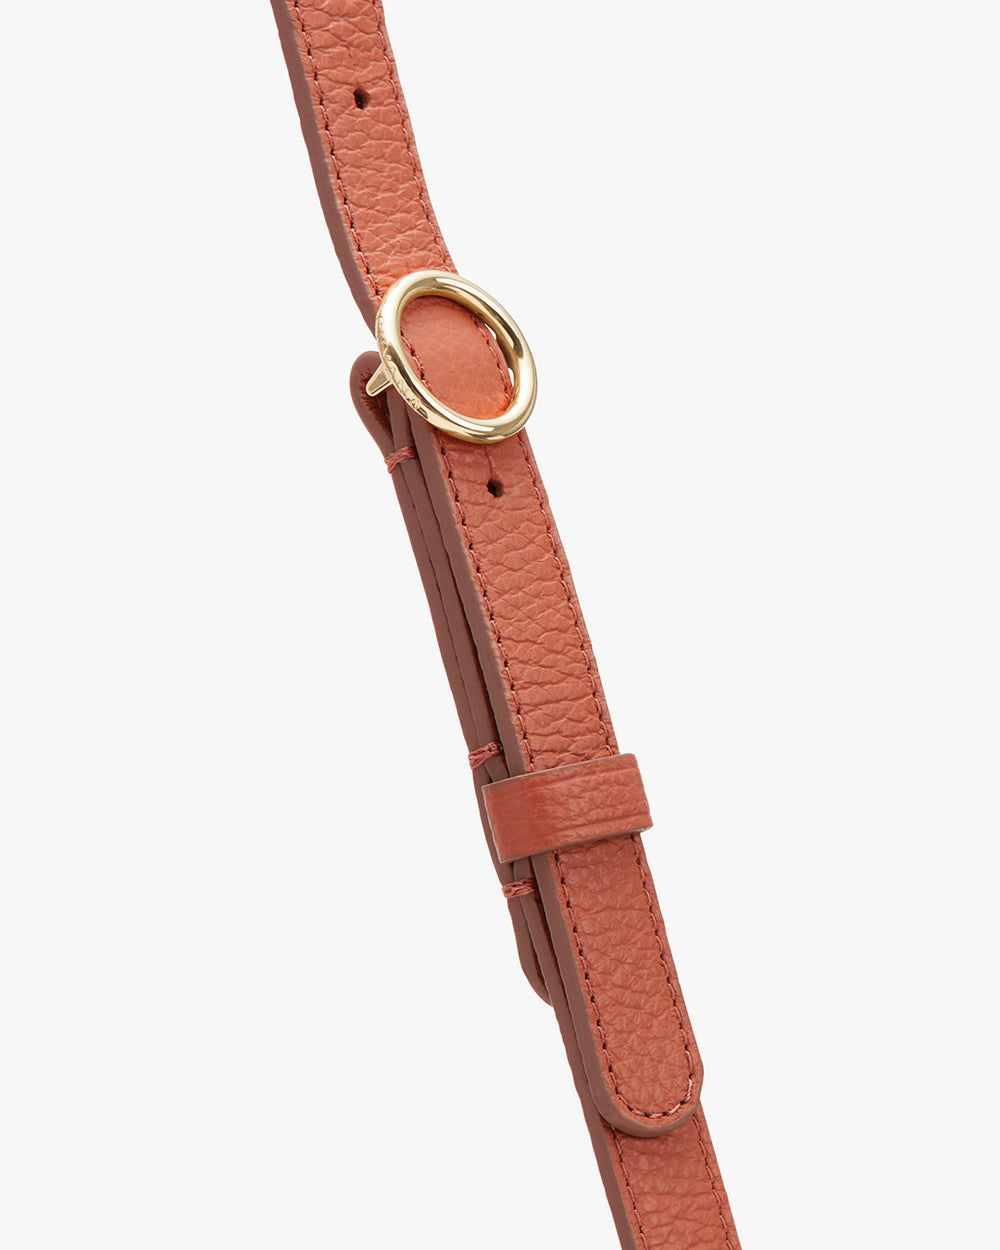 Close-up of a leather strap with a metal buckle and adjustment holes.